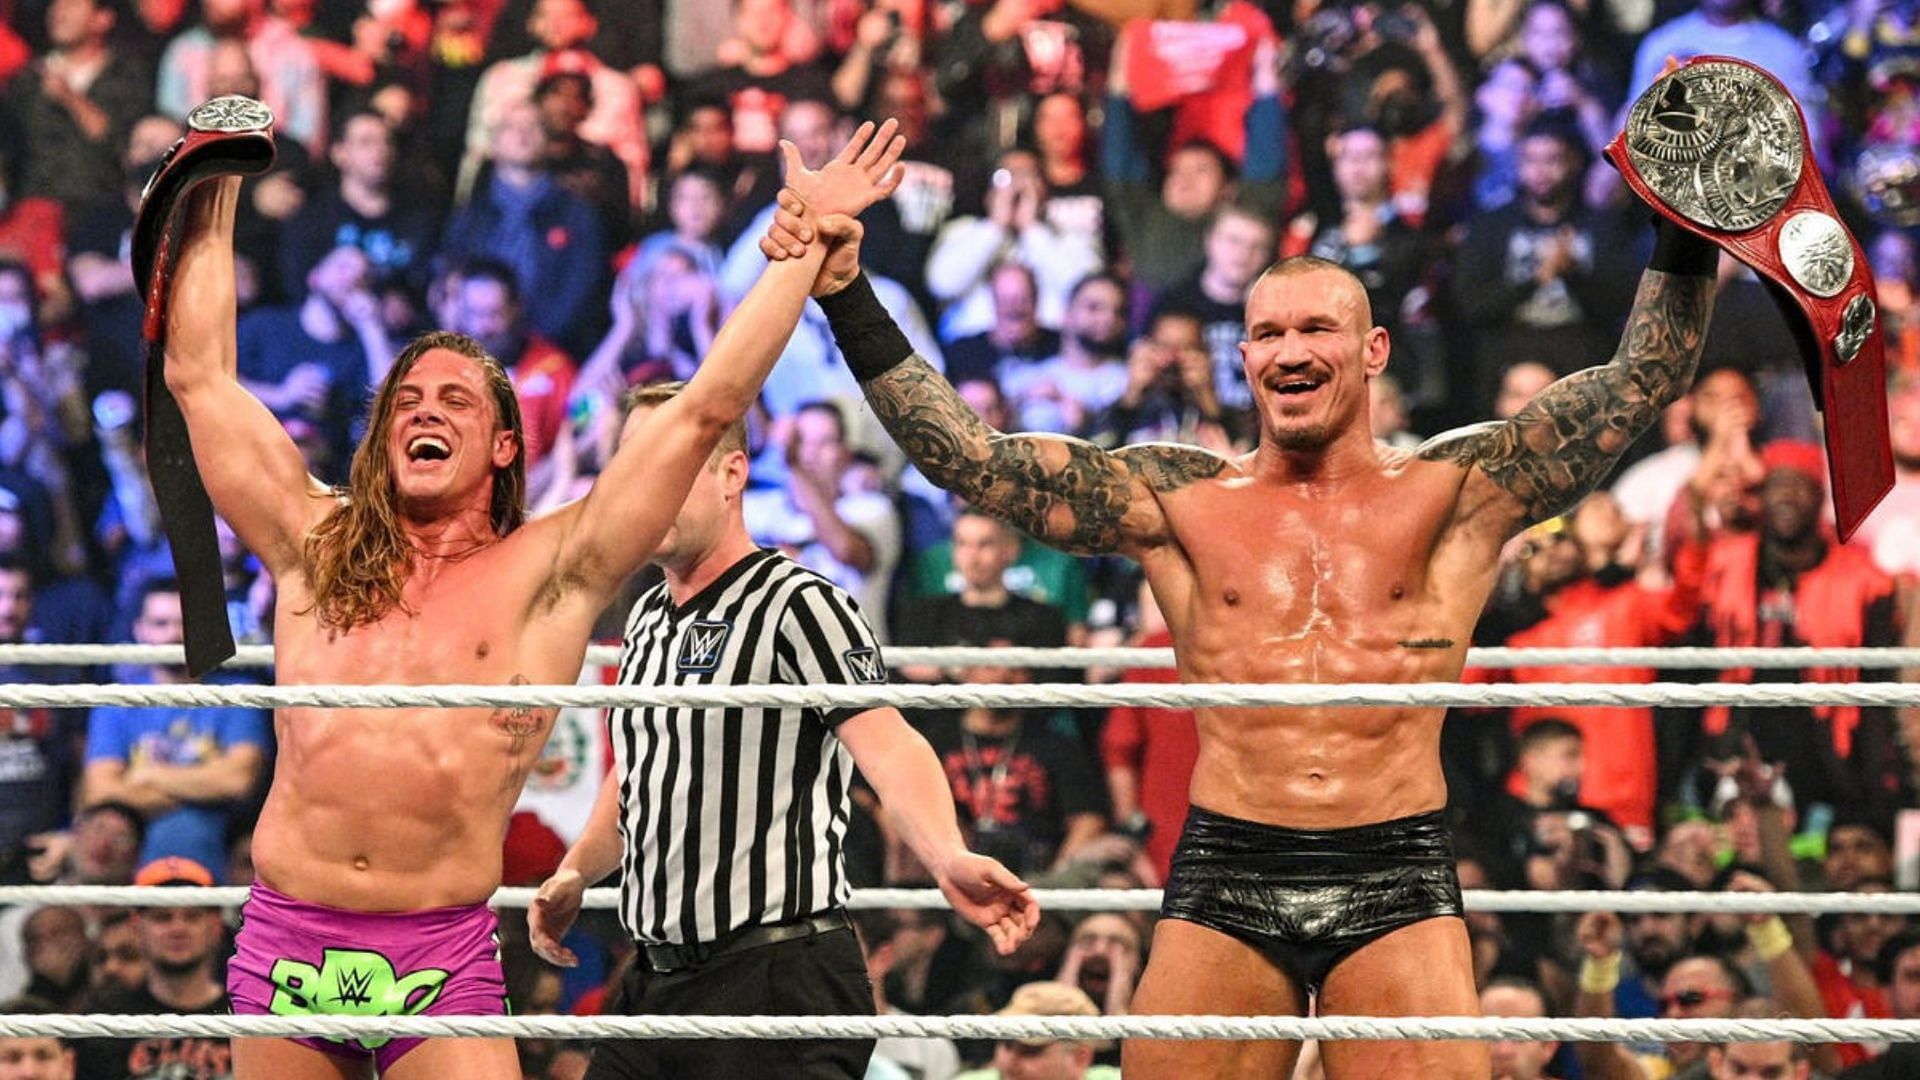 Matt Riddle and Randy Orton are two-time WWE RAW Tag Team Champions.